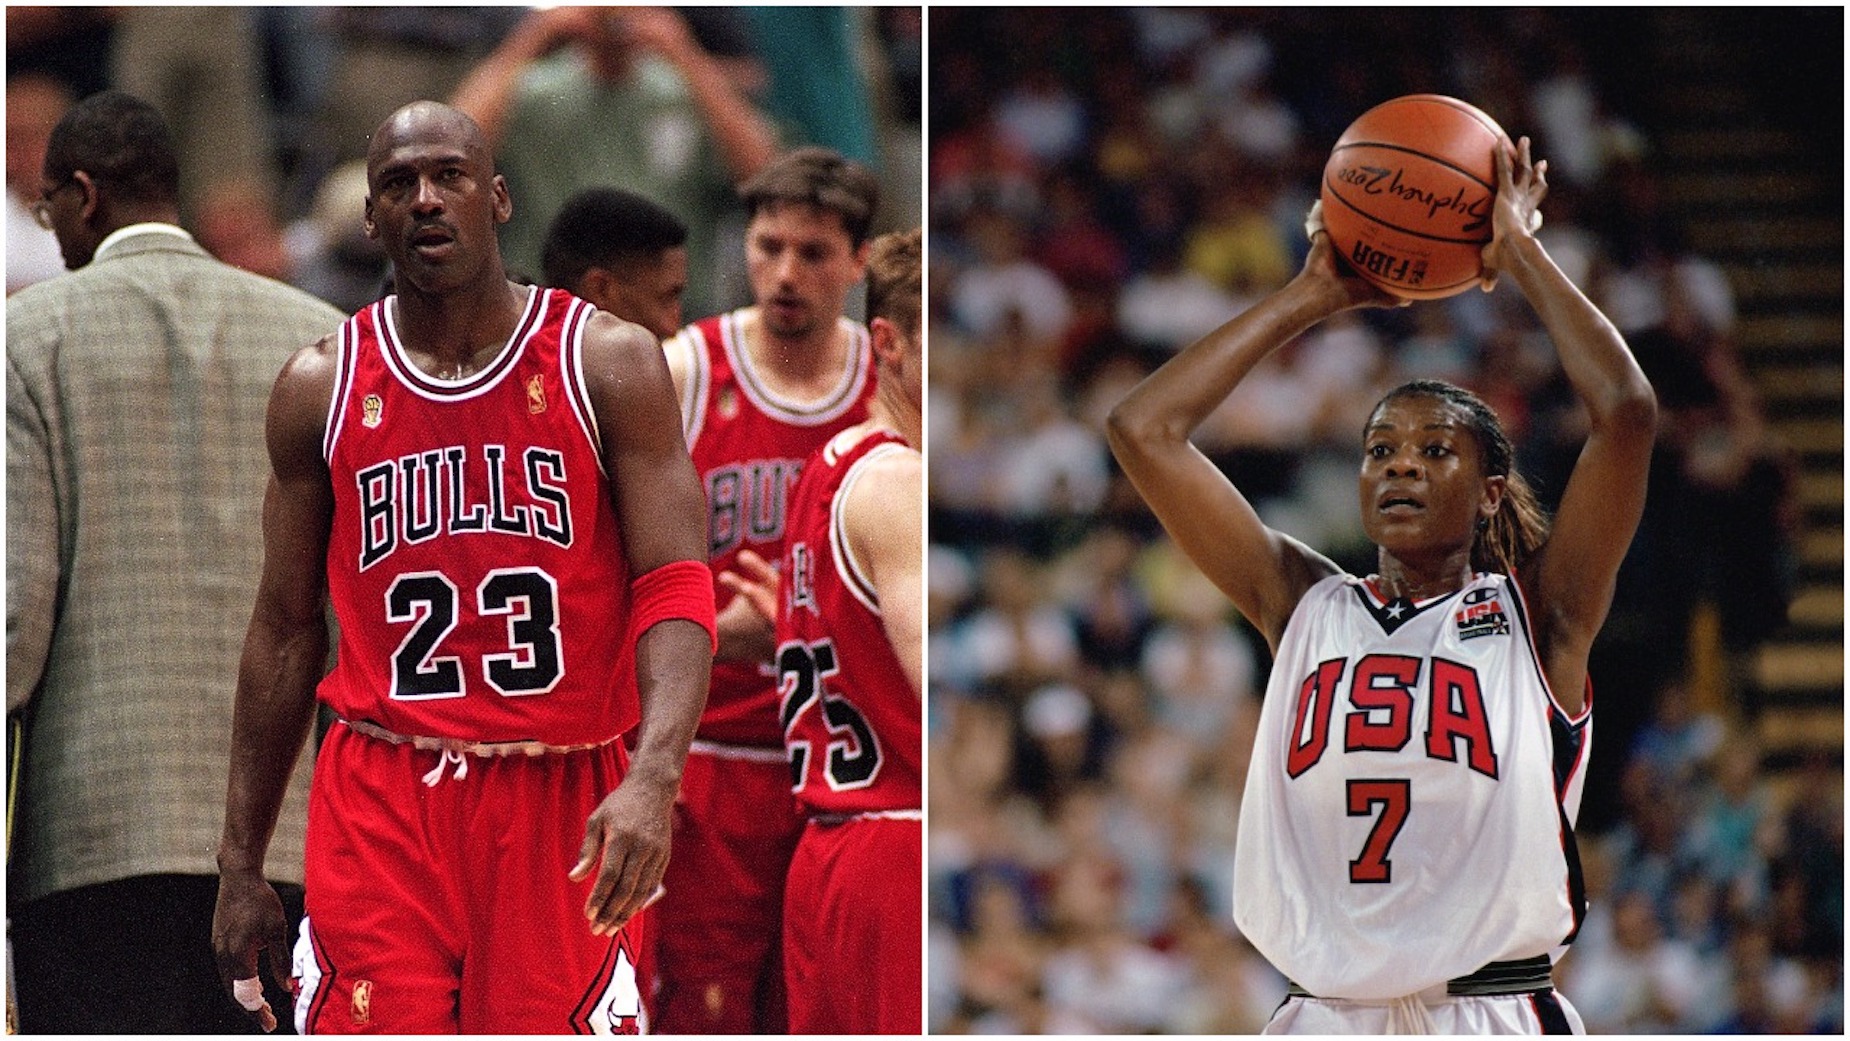 Michael Jordan (L) and Sheryl Swoopes (R) are both basketball legends.